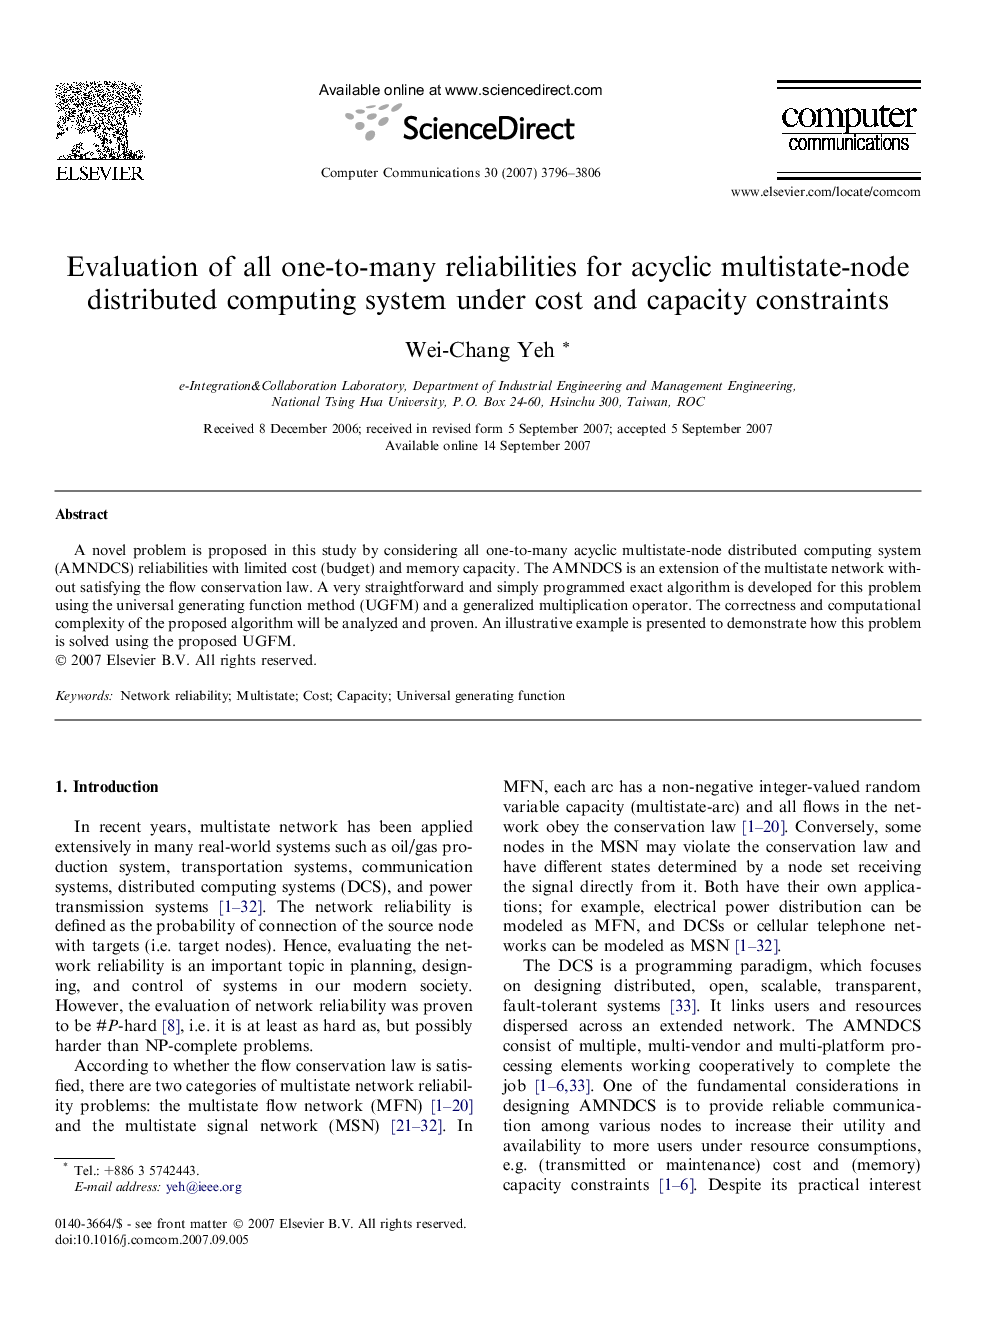 Evaluation of all one-to-many reliabilities for acyclic multistate-node distributed computing system under cost and capacity constraints